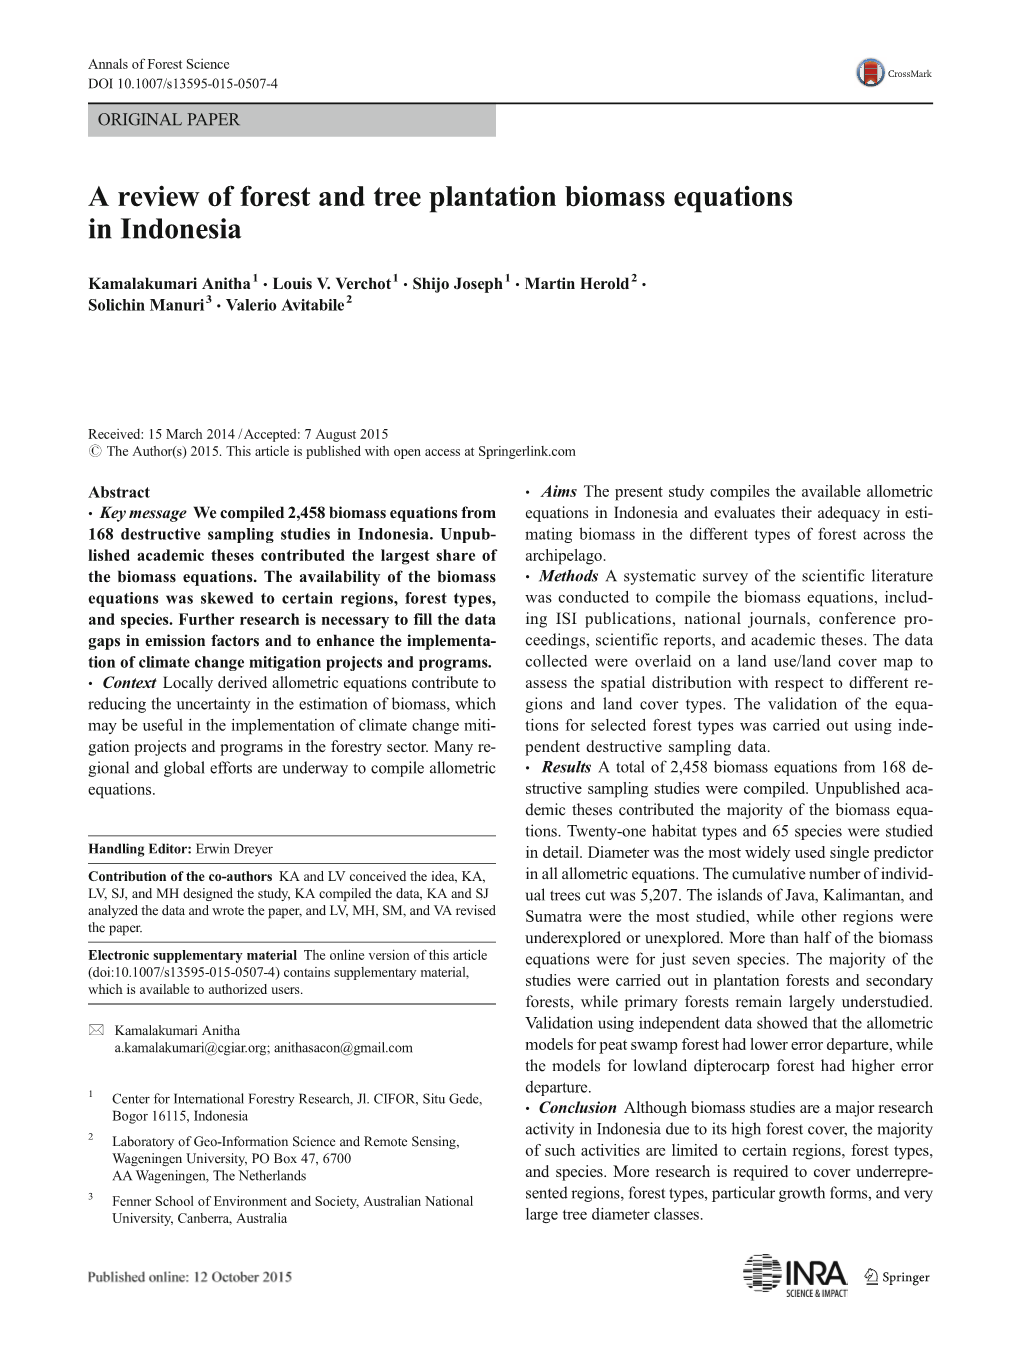 A Review of Forest and Tree Plantation Biomass Equations in Indonesia